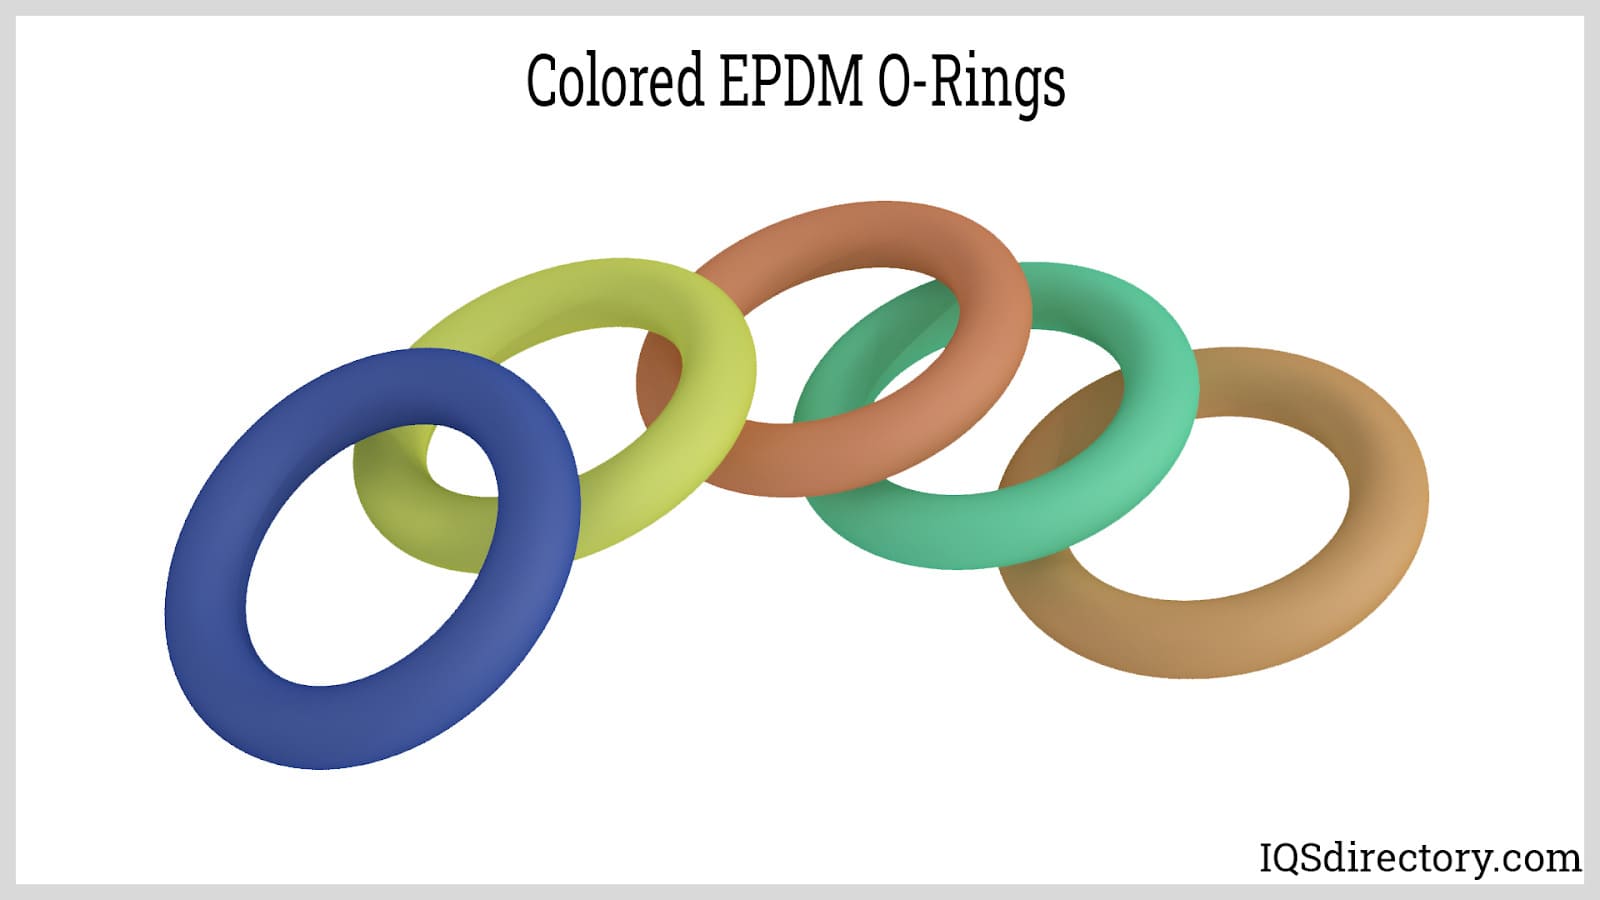 https://www.iqsdirectory.com/articles/o-ring/colored-epdm-o-rings.jpg